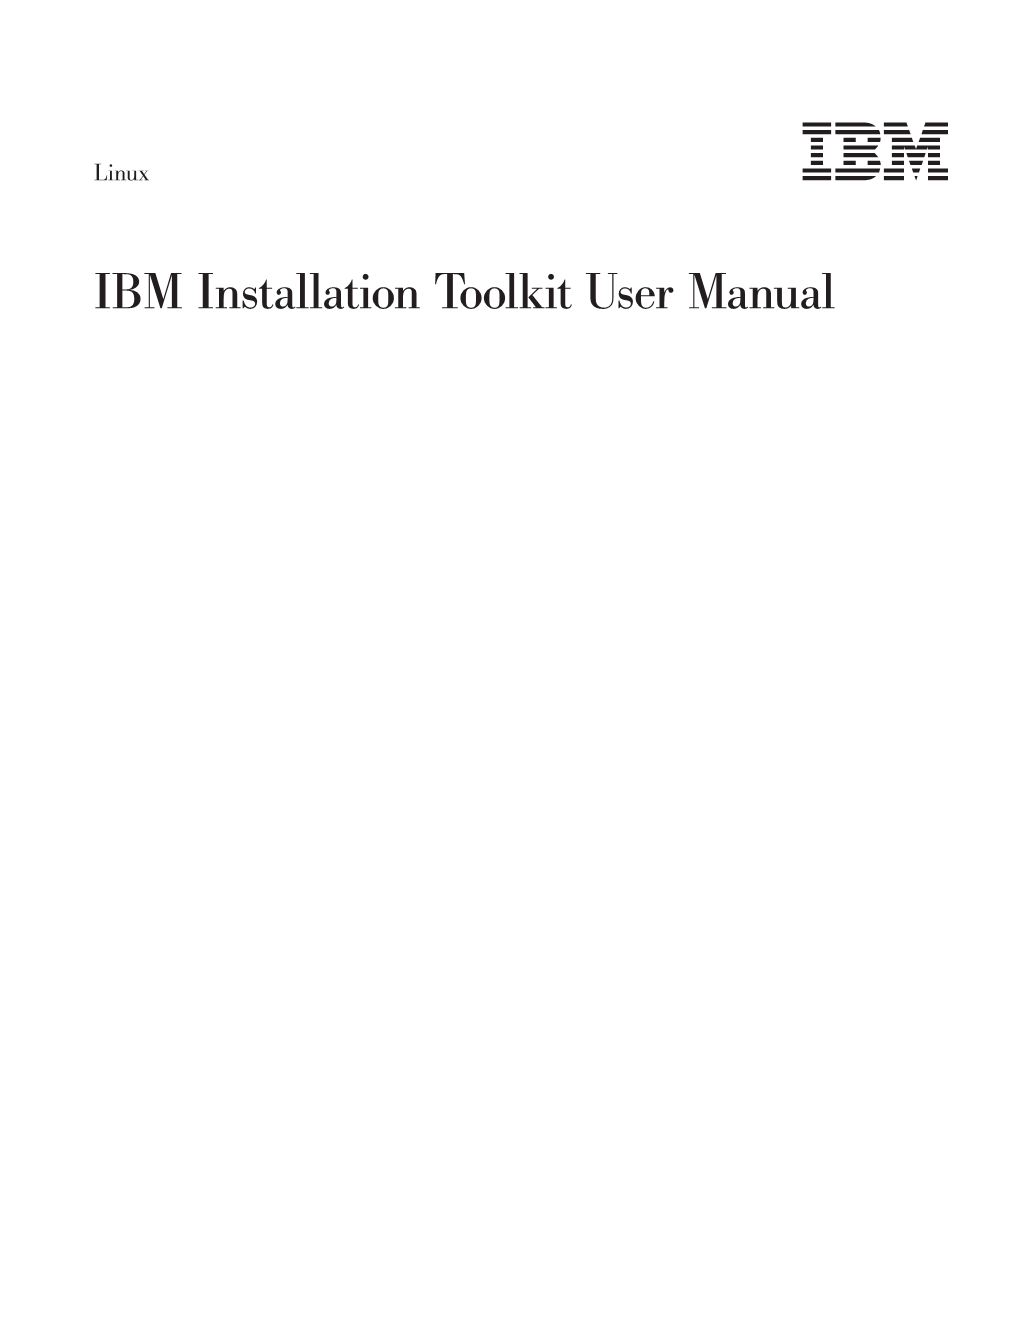 Linux: IBM Installation Toolkit User Manual About This Guide